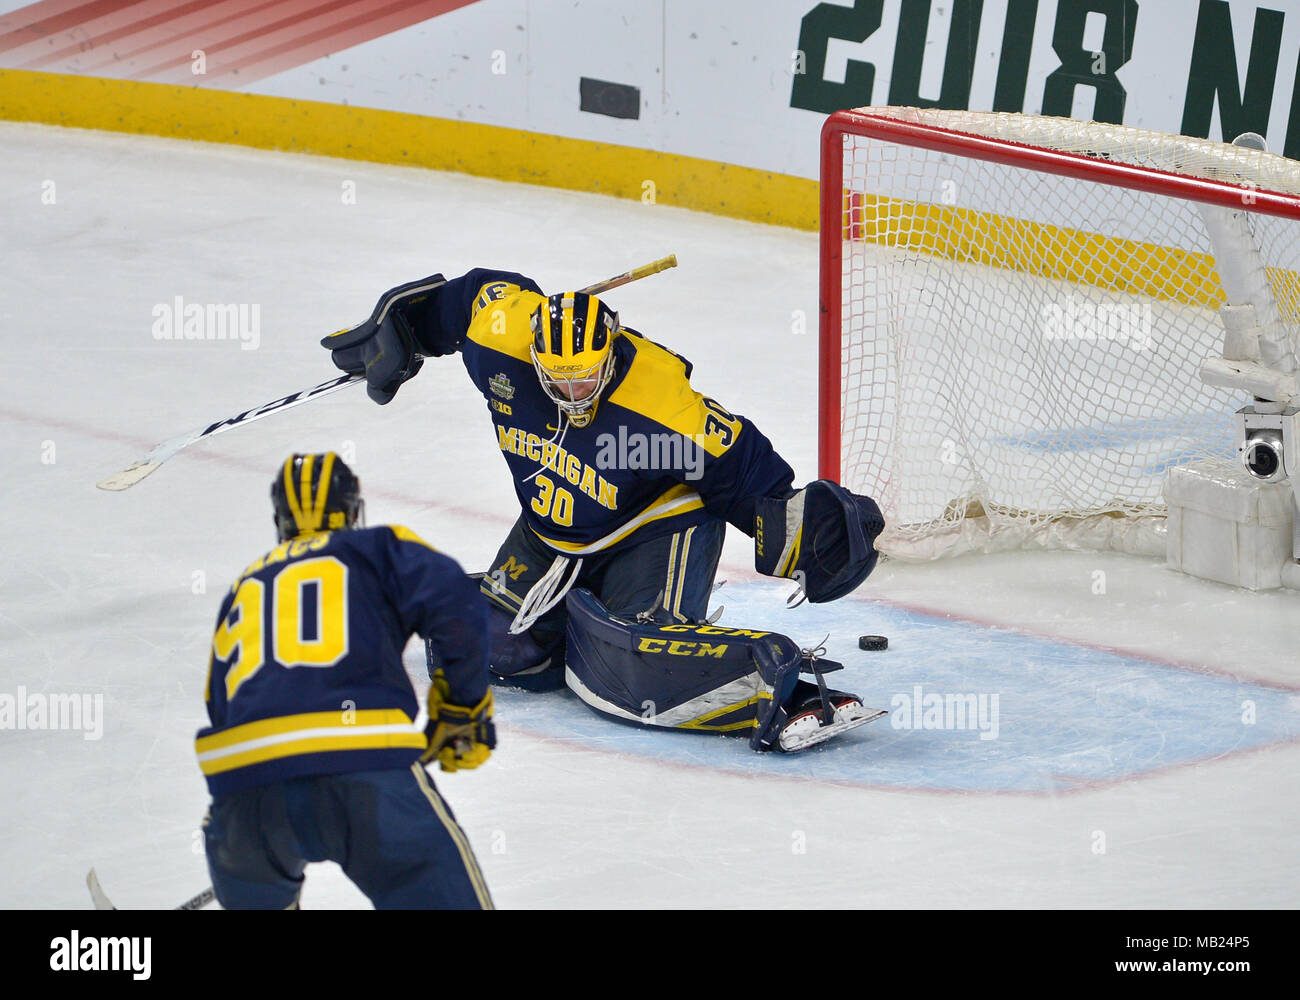 Saint Paul, Minnesota, USA. 05th Apr, 2018. Michigan Wolverines goaltender Hayden Lavigne #30 miss the block on the puck of the final seconds during the Frozen Four semi-finals game between the Michigan Wolverines and the Notre Dame Fighting Irish at Xcel Energry Center in Saint Paul, Minnesota. Notre Dame advances against Michigan, 4-3. Patrick Green/CSM/Alamy Live News Stock Photo